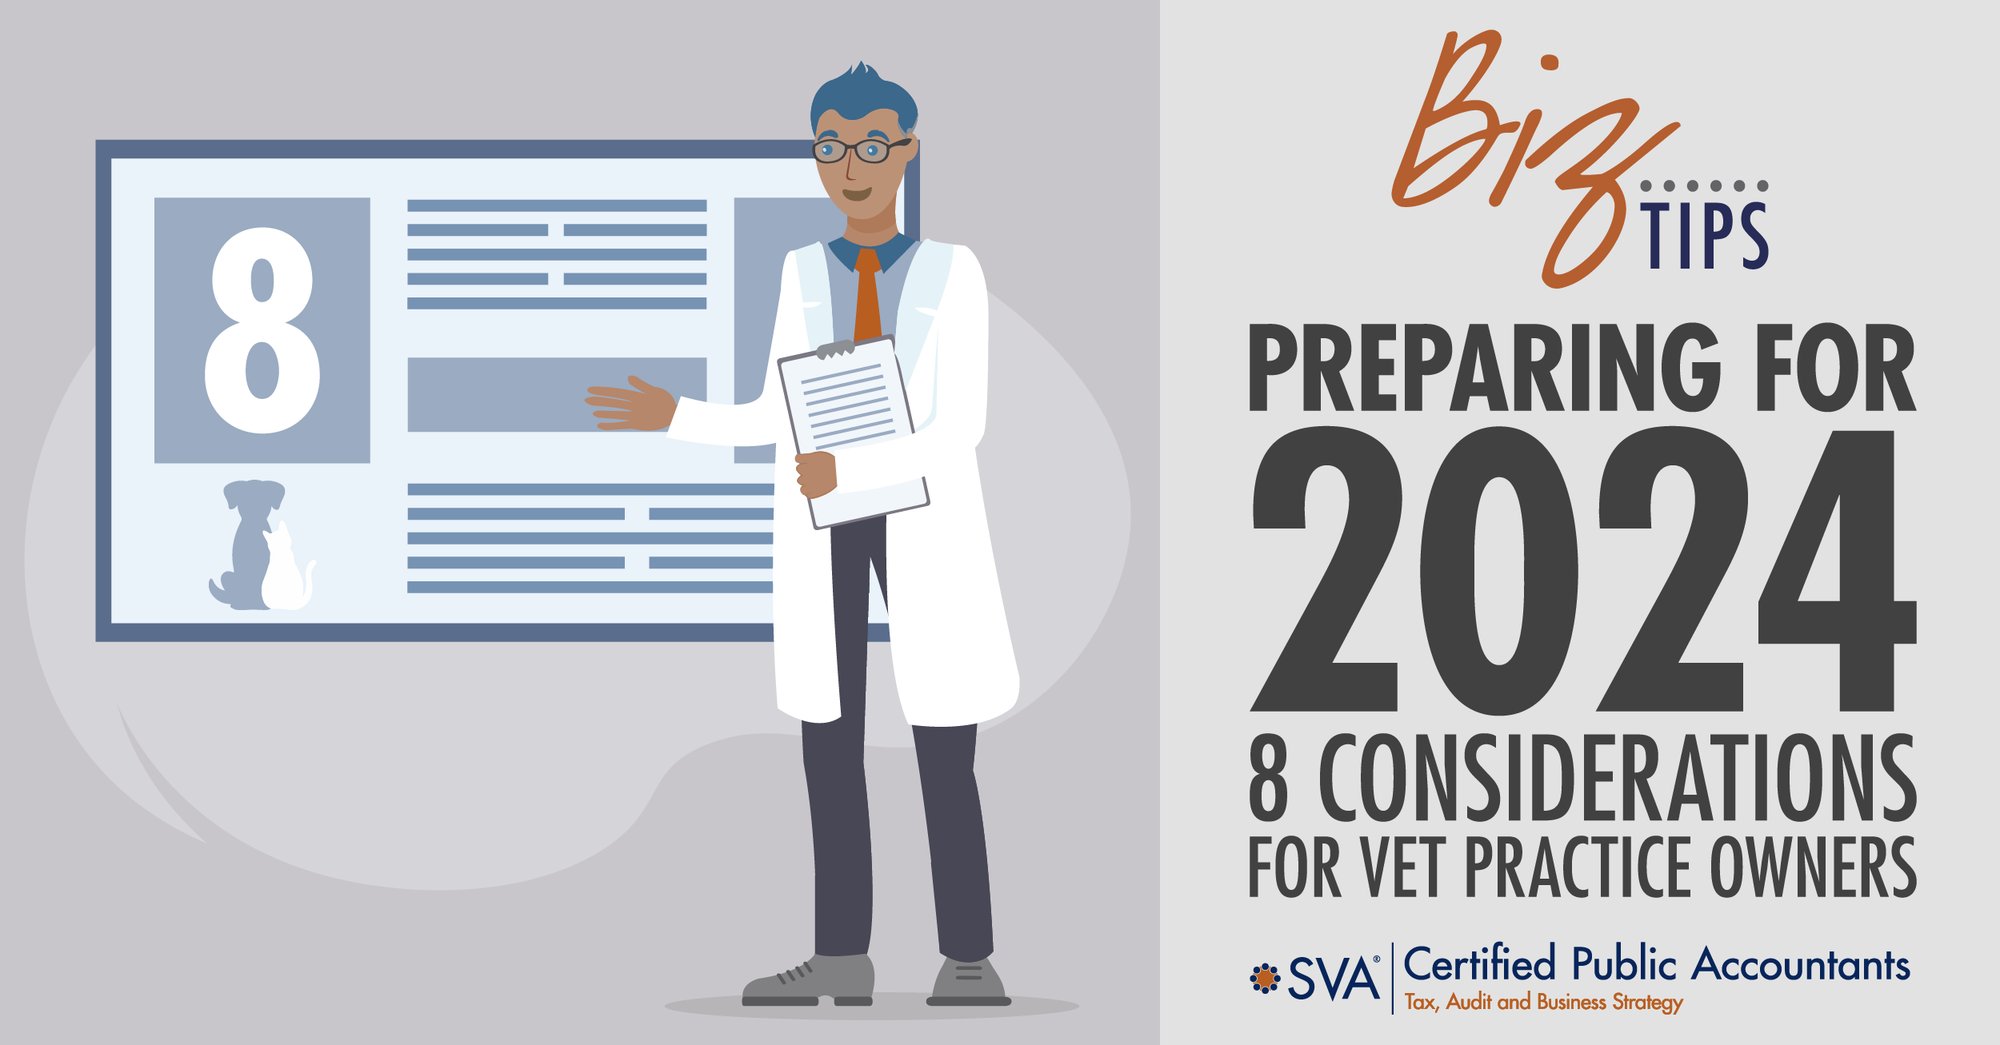 sva-certified-public-accountants-preparing-for-2024-8-considerations-for-vet-practice-owners